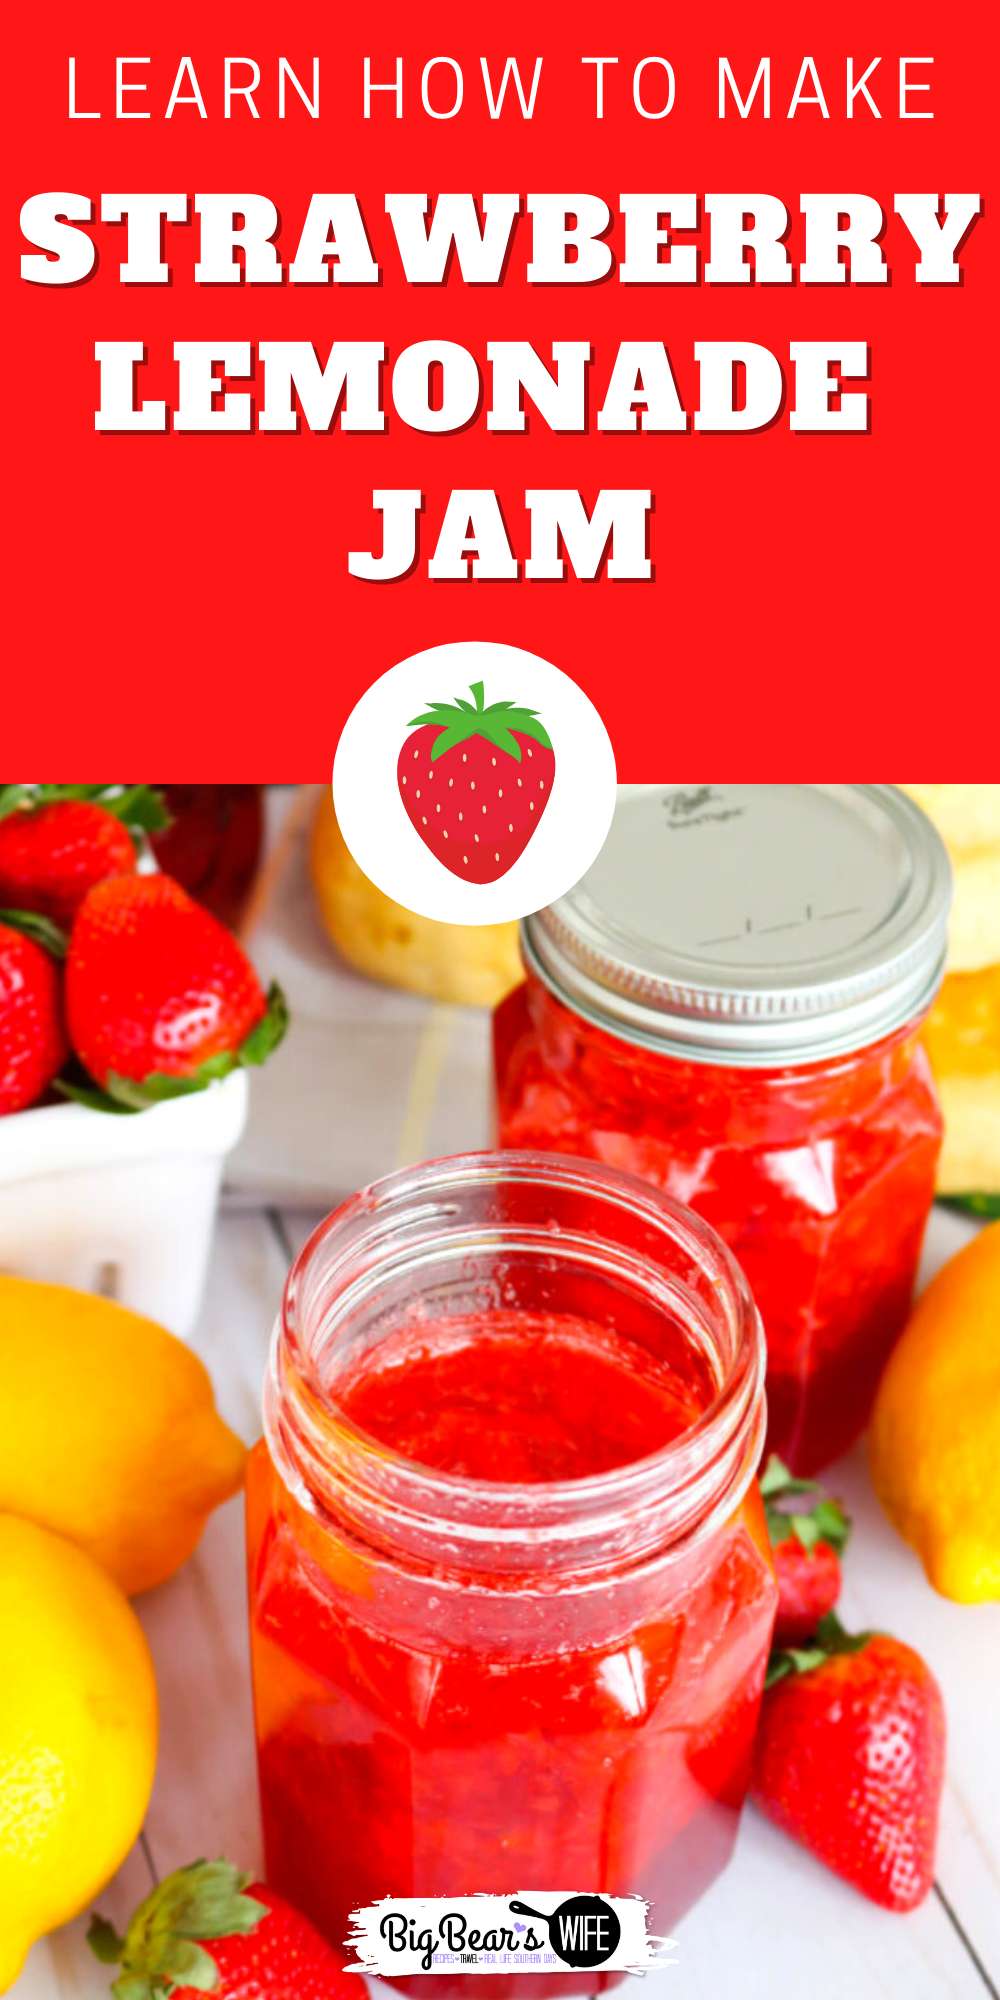 Strawberries and summer lemonade stands come together to create this delicious Strawberry Lemonade Jam.  Tastes yummy on biscuits, in a peanut butter and jelly sandwich, or on toast.   Plus, there is no fancy canning equipment involved! Refrigerate for up to 3 weeks or freeze up to 1 year. via @bigbearswife